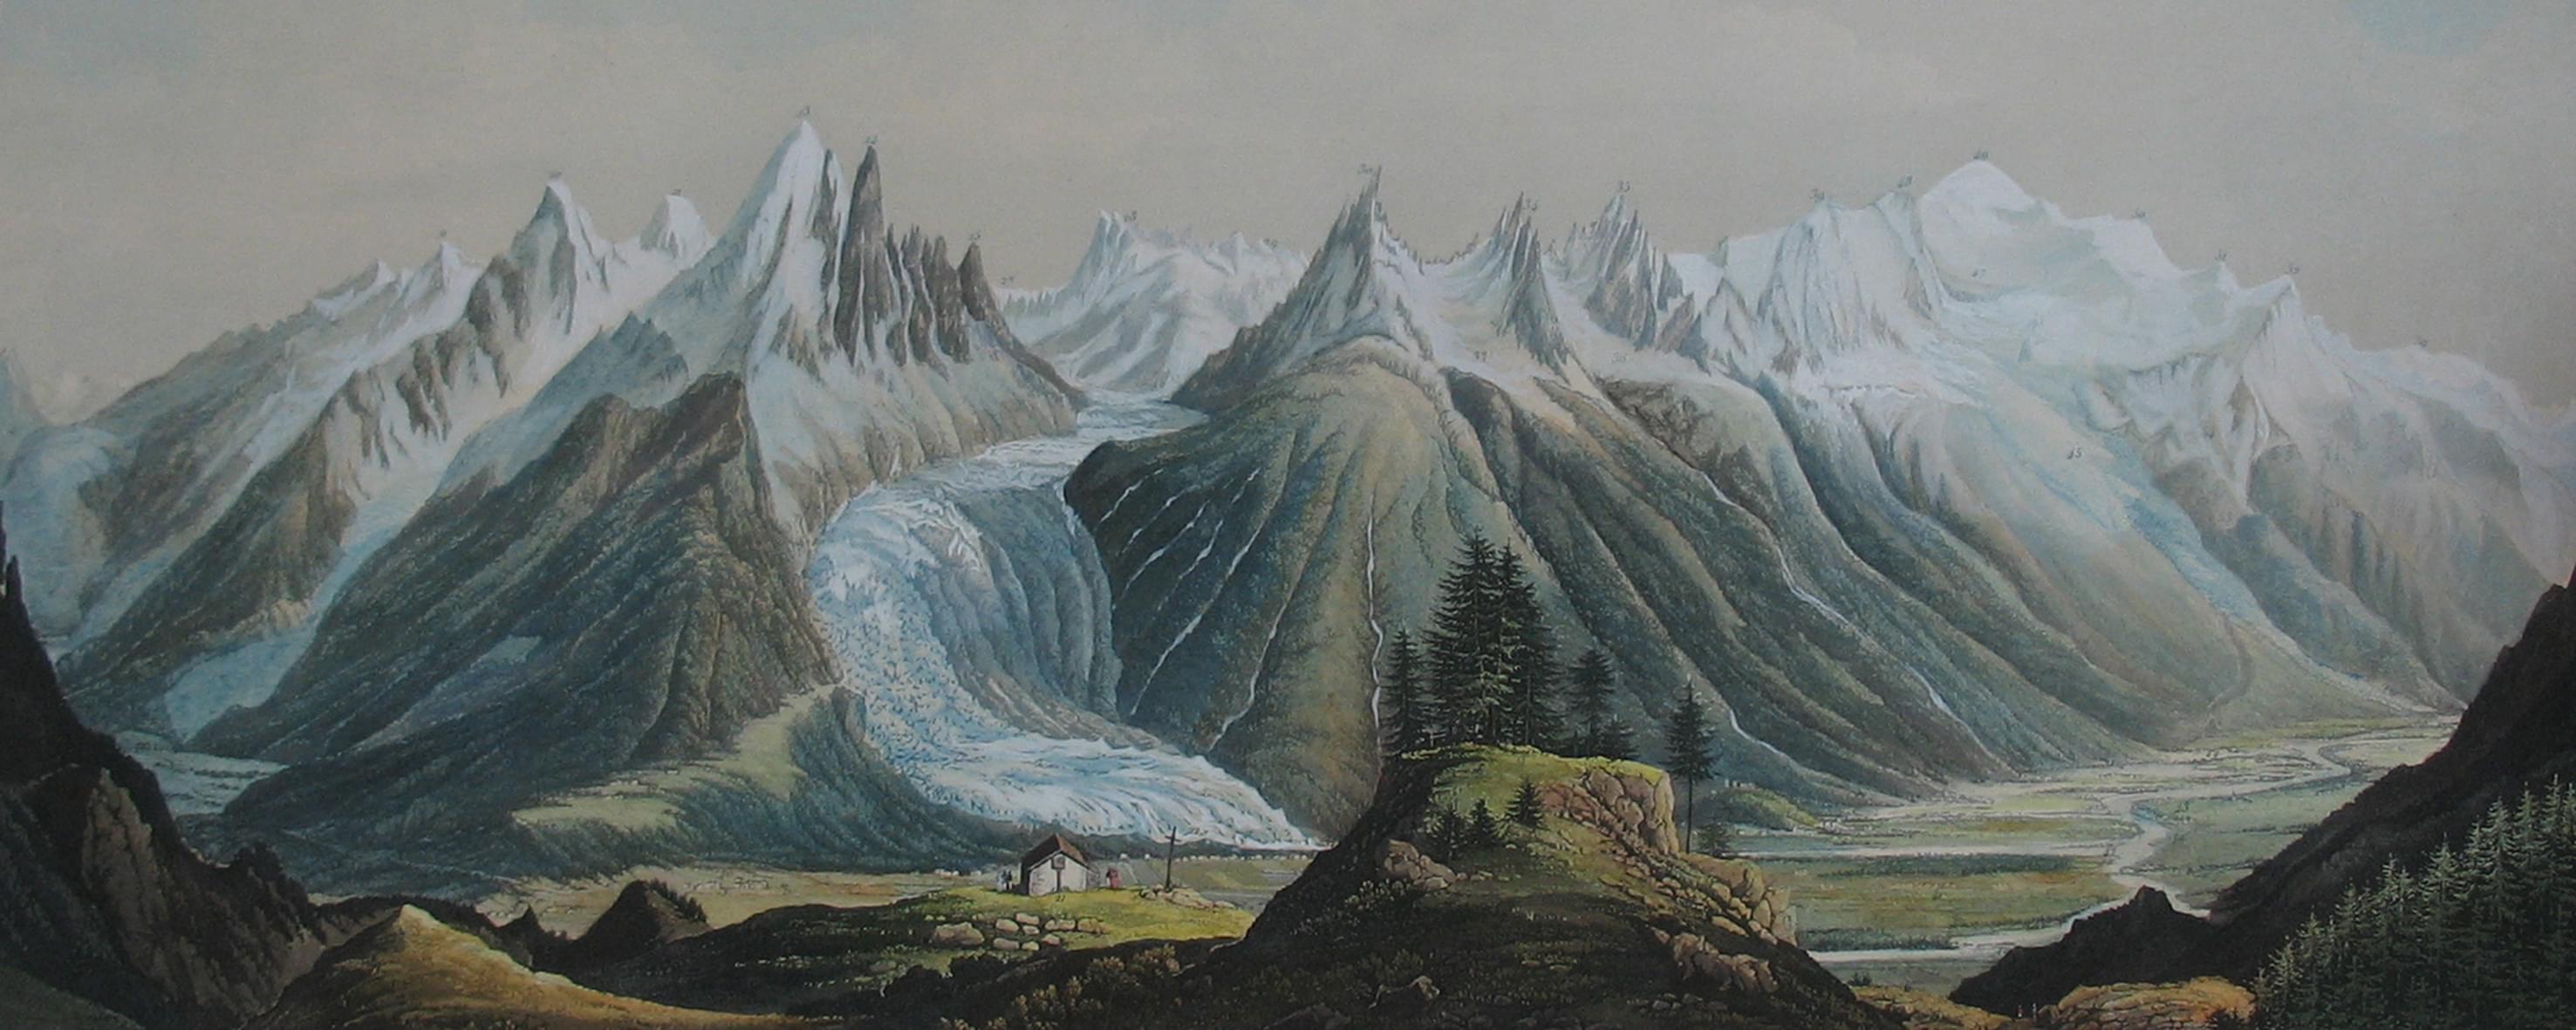 1800-1850 - 575 AG Dubois - Mer de glace - Musee Alpin